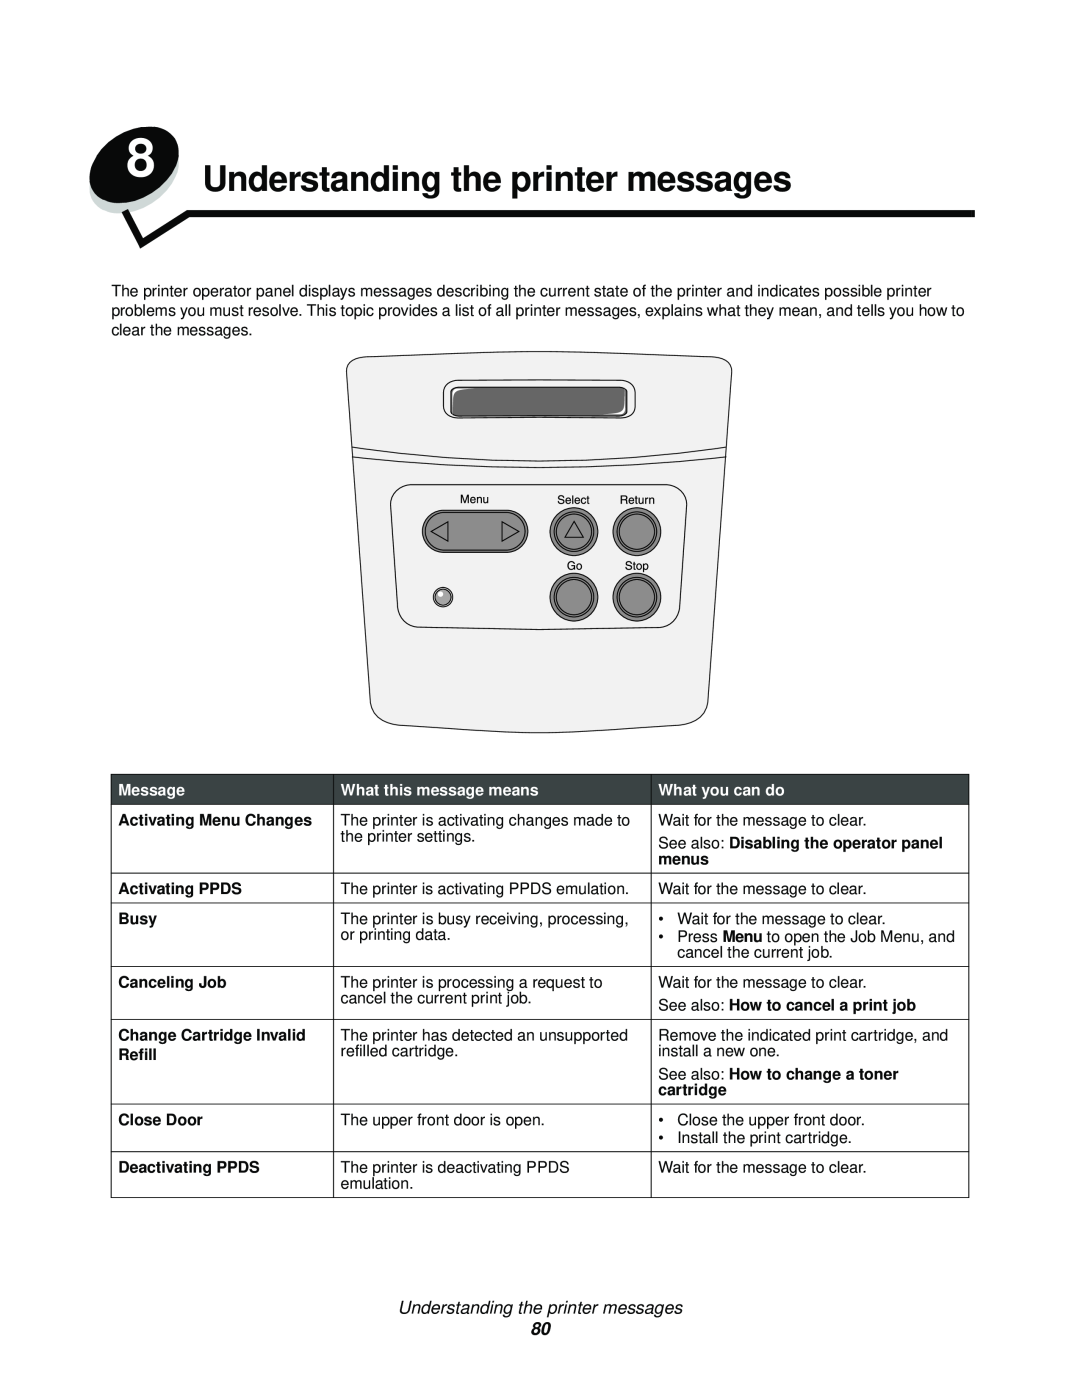 Lexmark 342n, 340 manual Understanding the printer messages, Message, What this message means, What you can do 